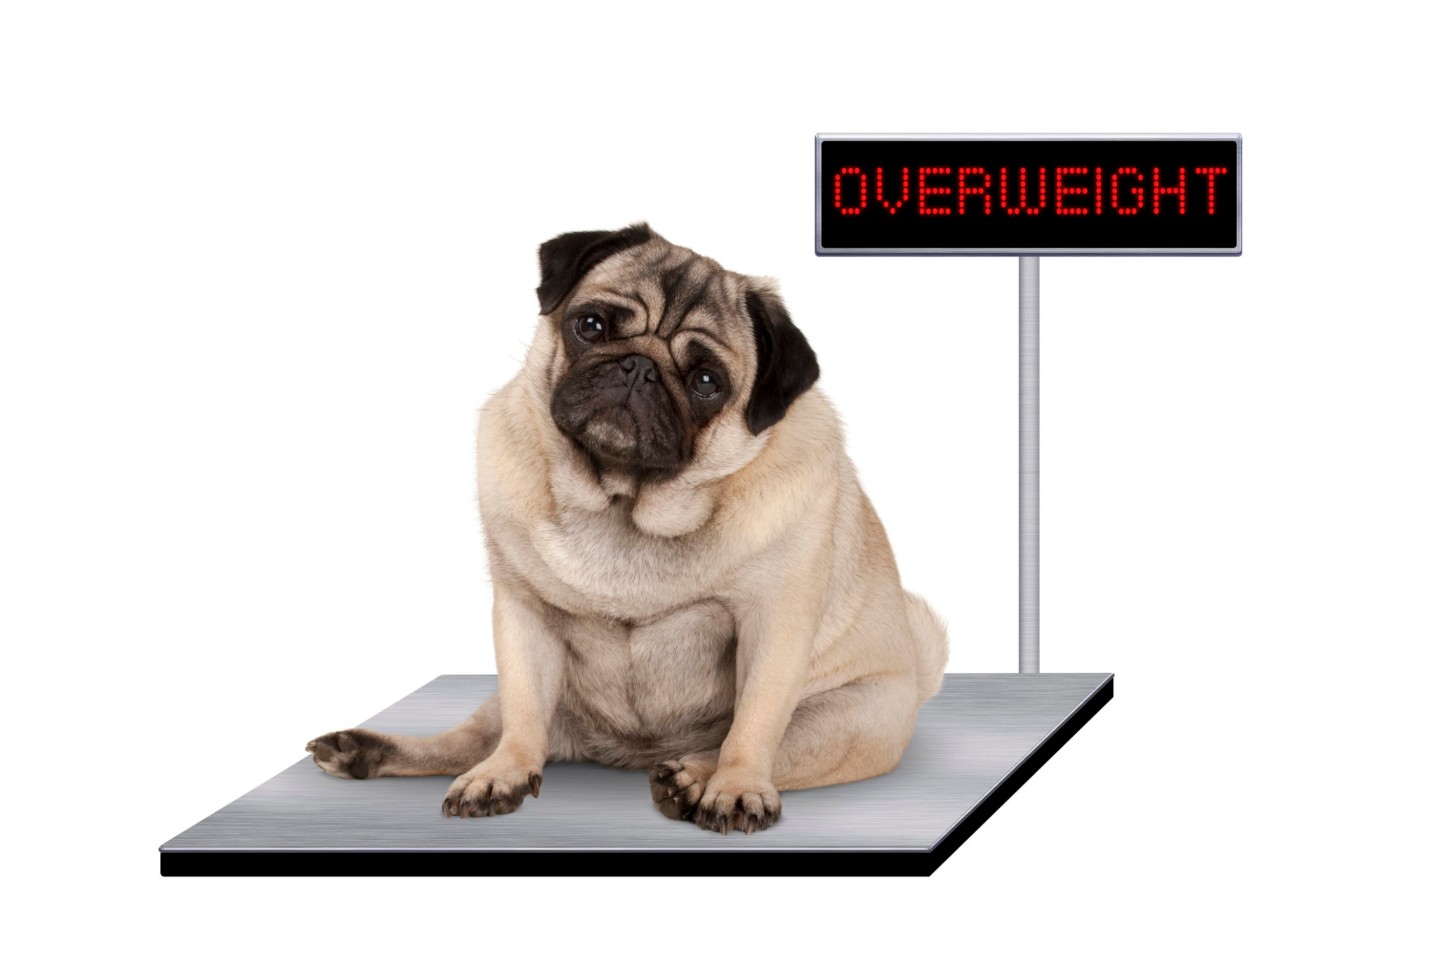 heavy fat pug puppy dog sitting down on vet scale with overweight LED sign||Overweight